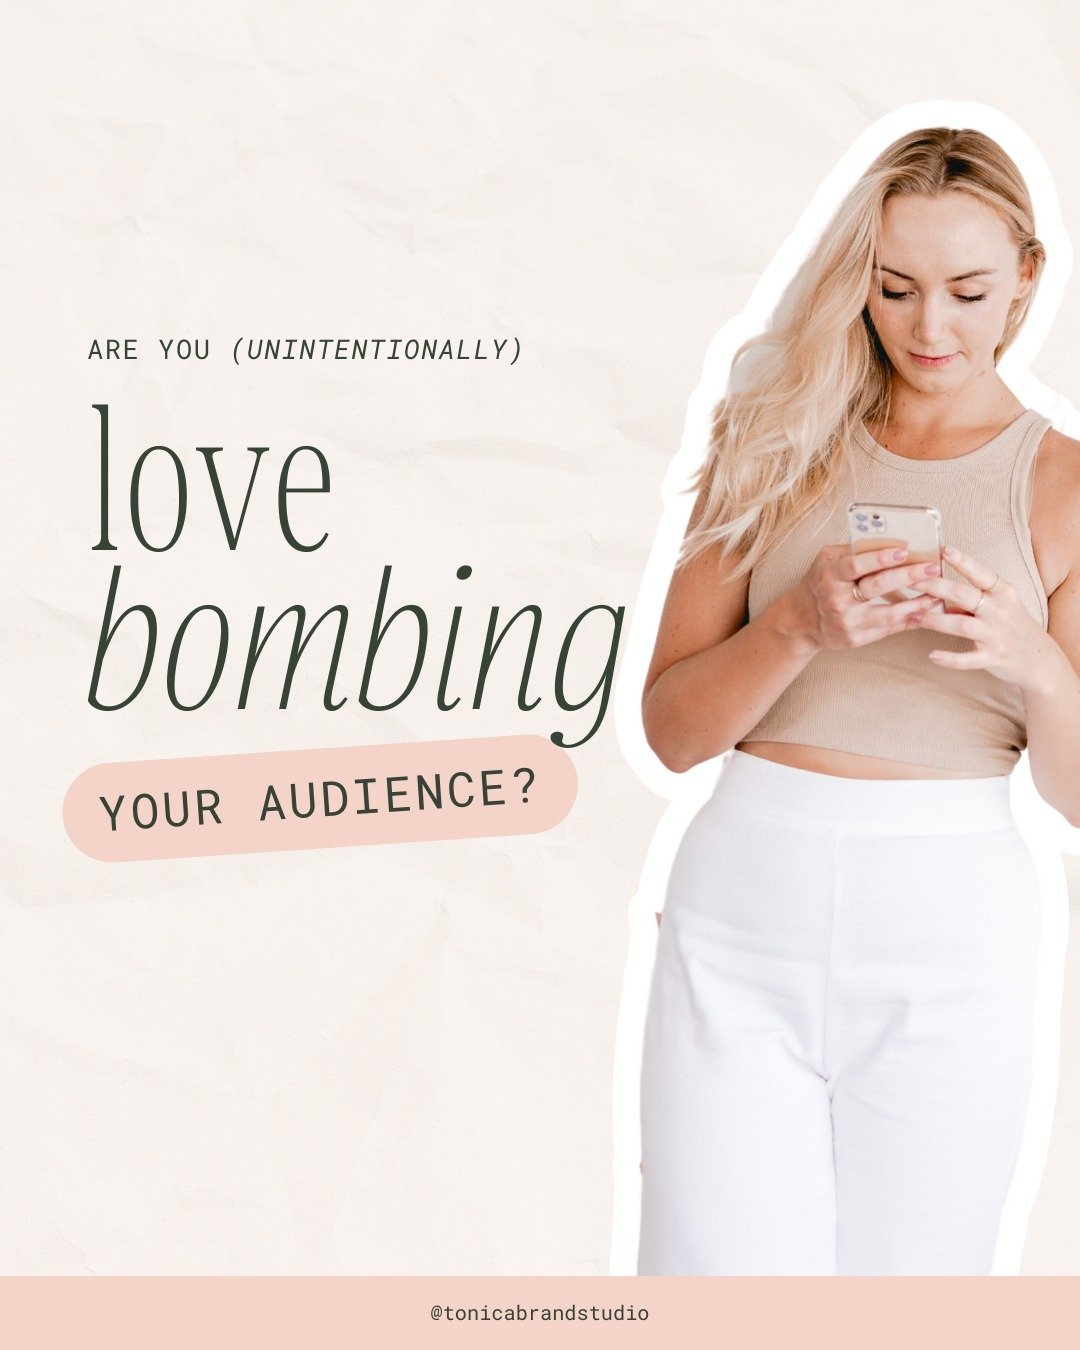 Love bombing, the sales page edition 💖💣

Ever seen a movie trailer that looked epic, only to find the best scenes were all in the trailer? 

That's kinda like love bombing&mdash;great previews, disappointing show.

And that's how A LOT of sales pag